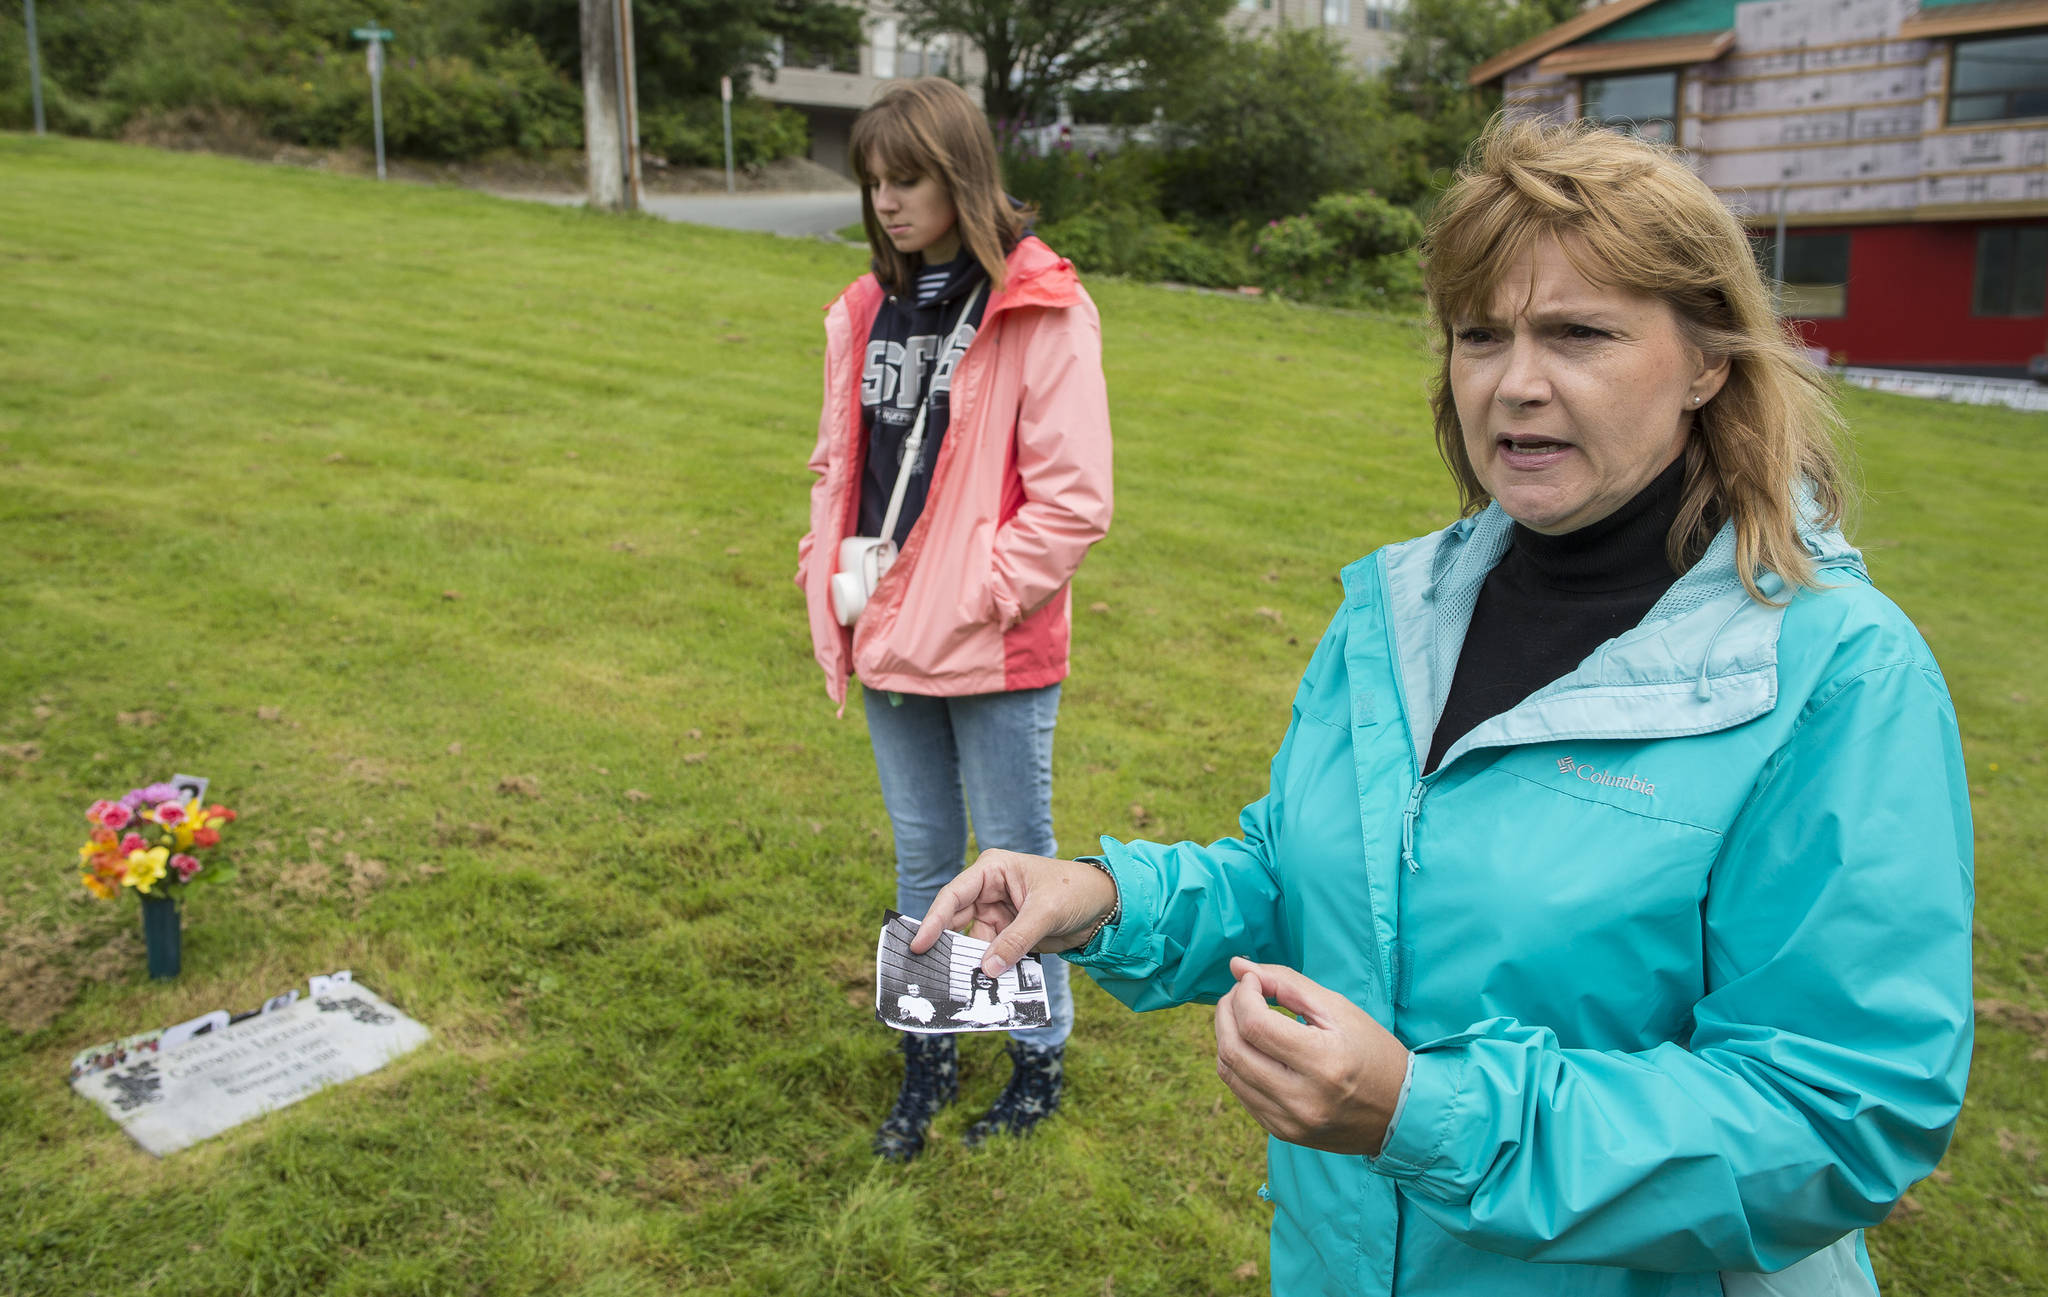 Paula Haug, of Folsom, California, and her daughter, Carlie, visit the grave of Haug’s great-grandmother Soyla Valentina Cardwell Lockhart on Tuesday, July 17, 2018. Cardwell died in Juneau in 1918. With the help of the folks at Evergreen Cemetery, she was able to track down where Lockhart was buried and place a stone on her previously unmarked grave. (Michael Penn | Juneau Empire)